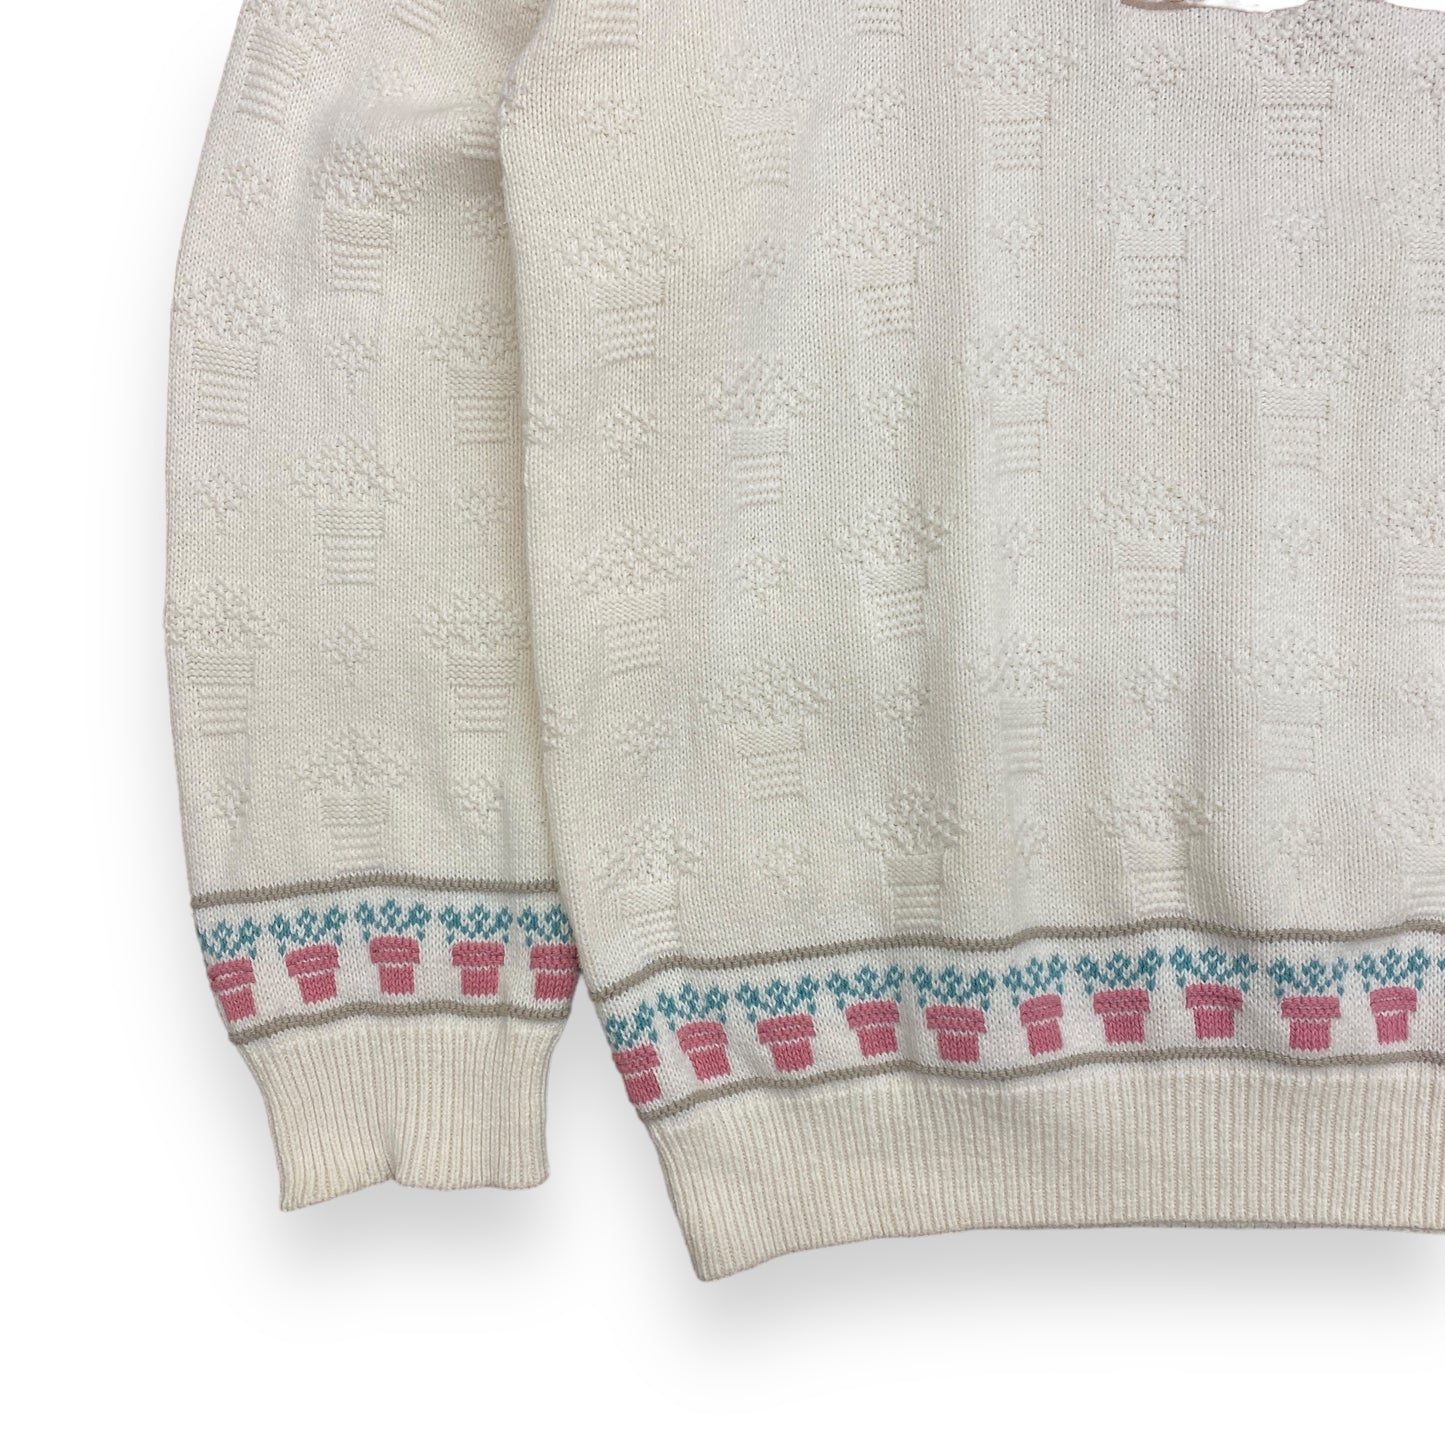 Vintage 1990s "Potted Plants" Collared Knit Sweater - Size Large